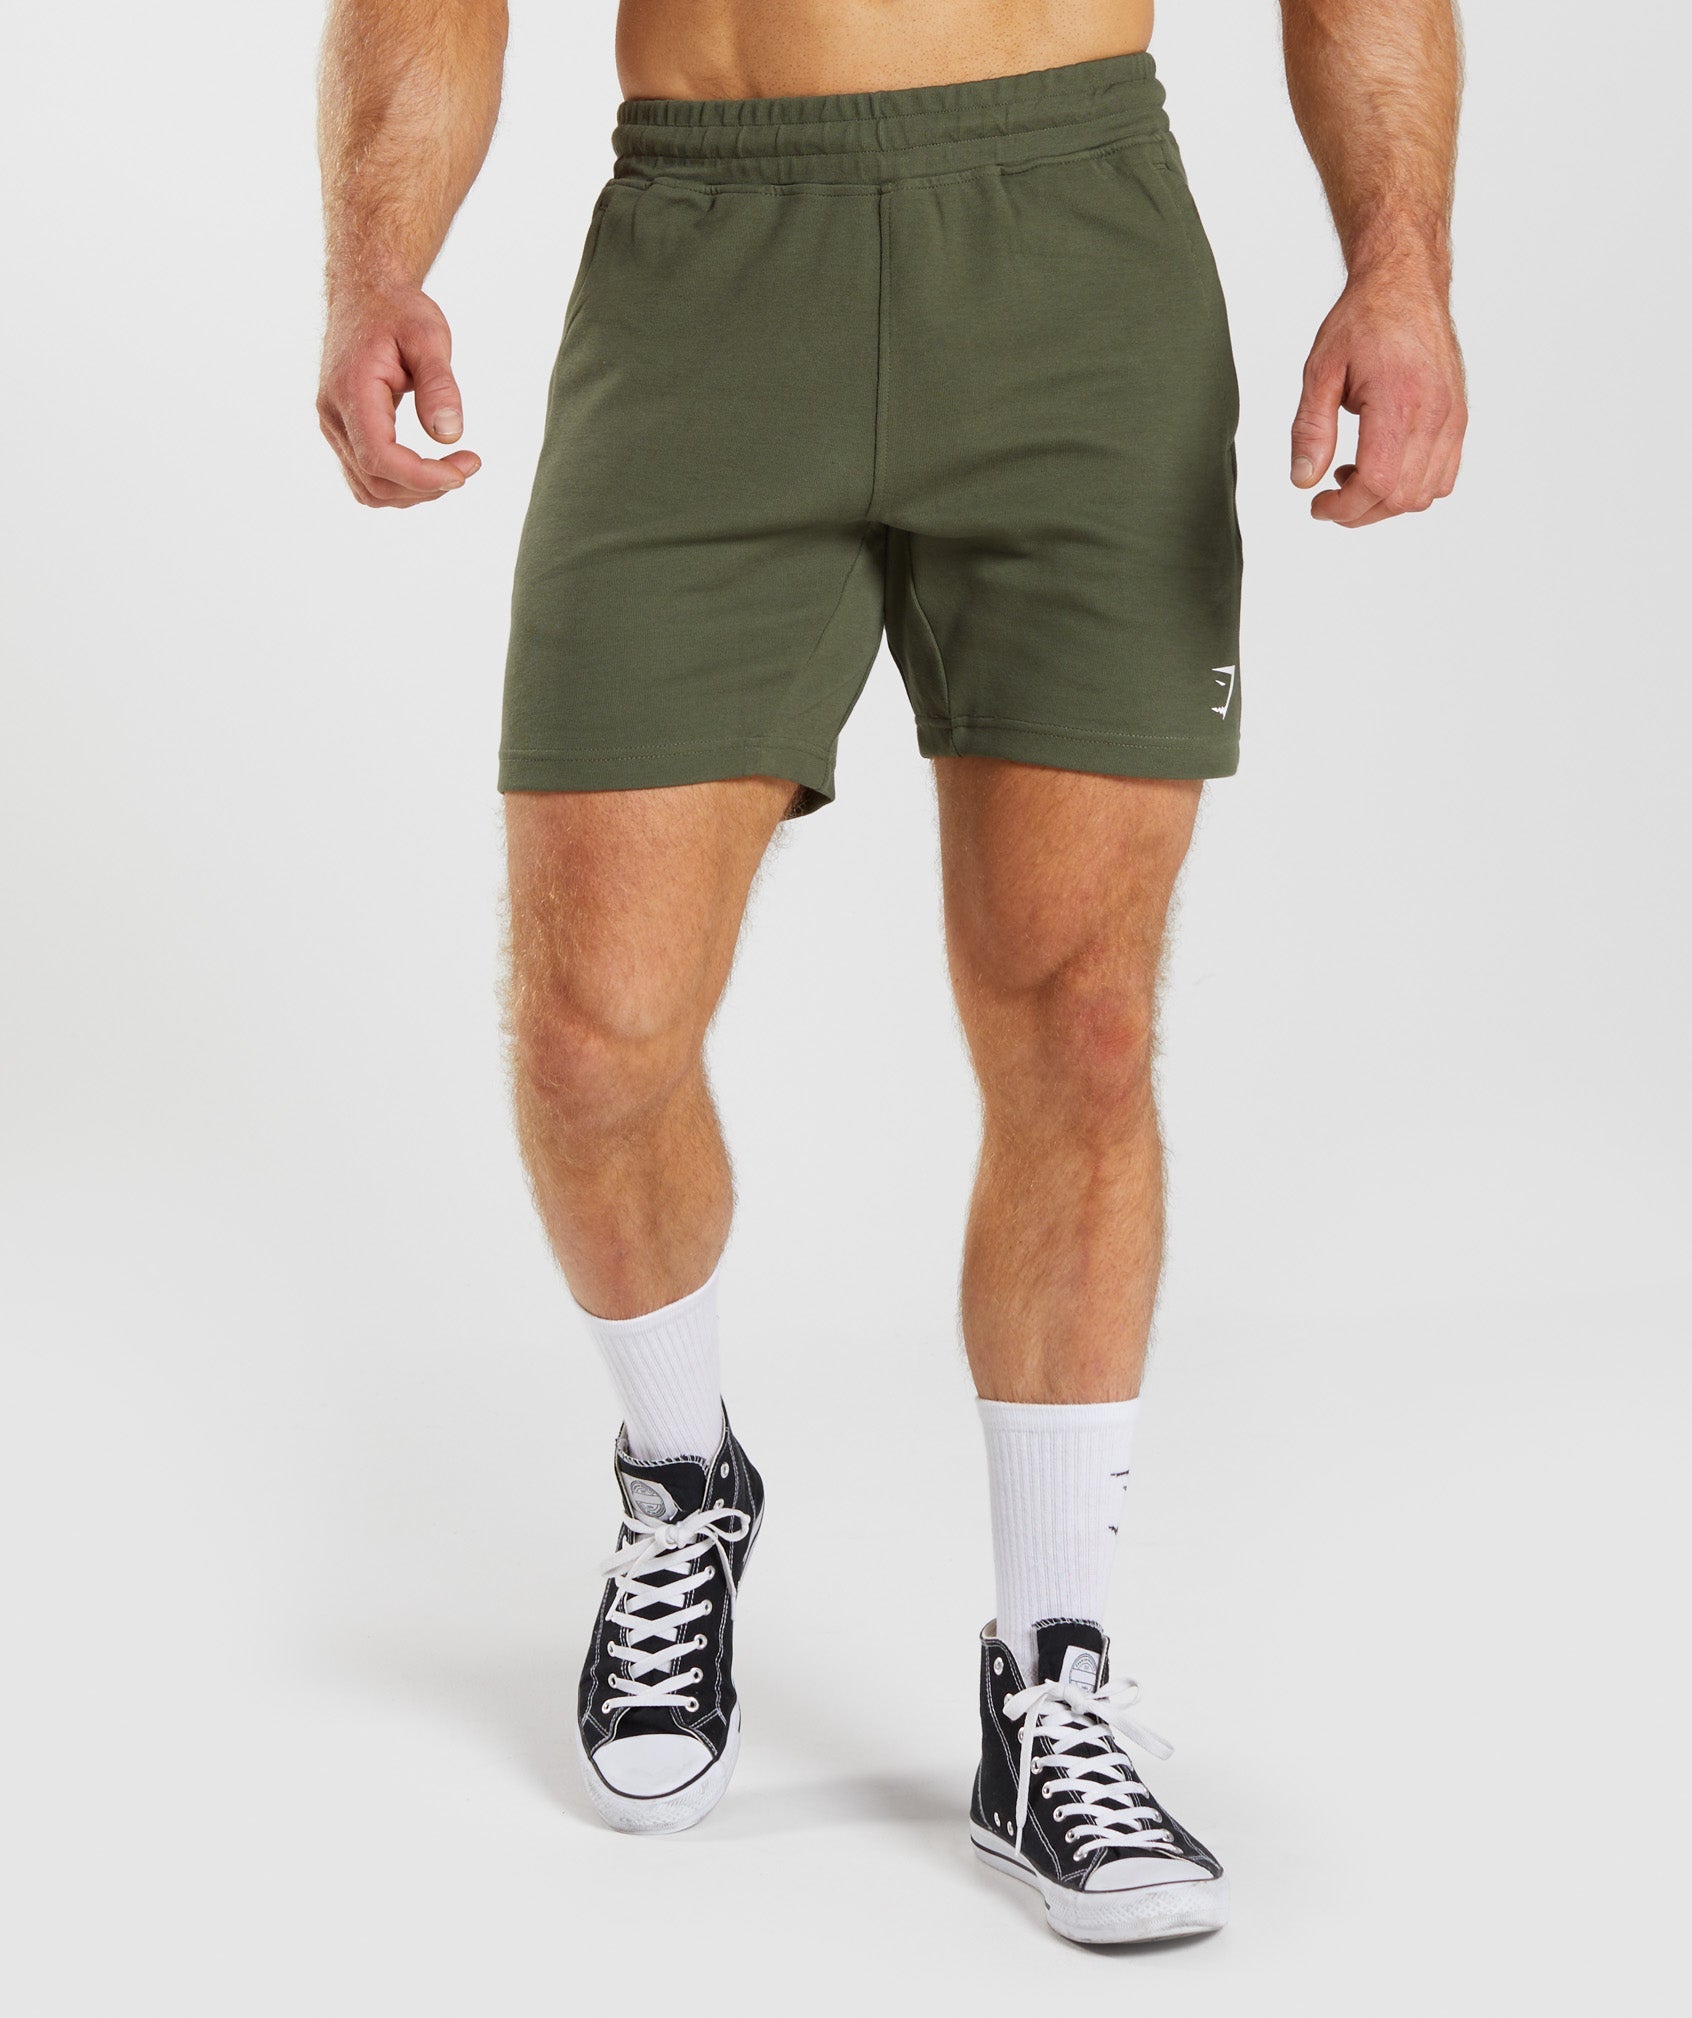 React 7" Shorts in Core Olive